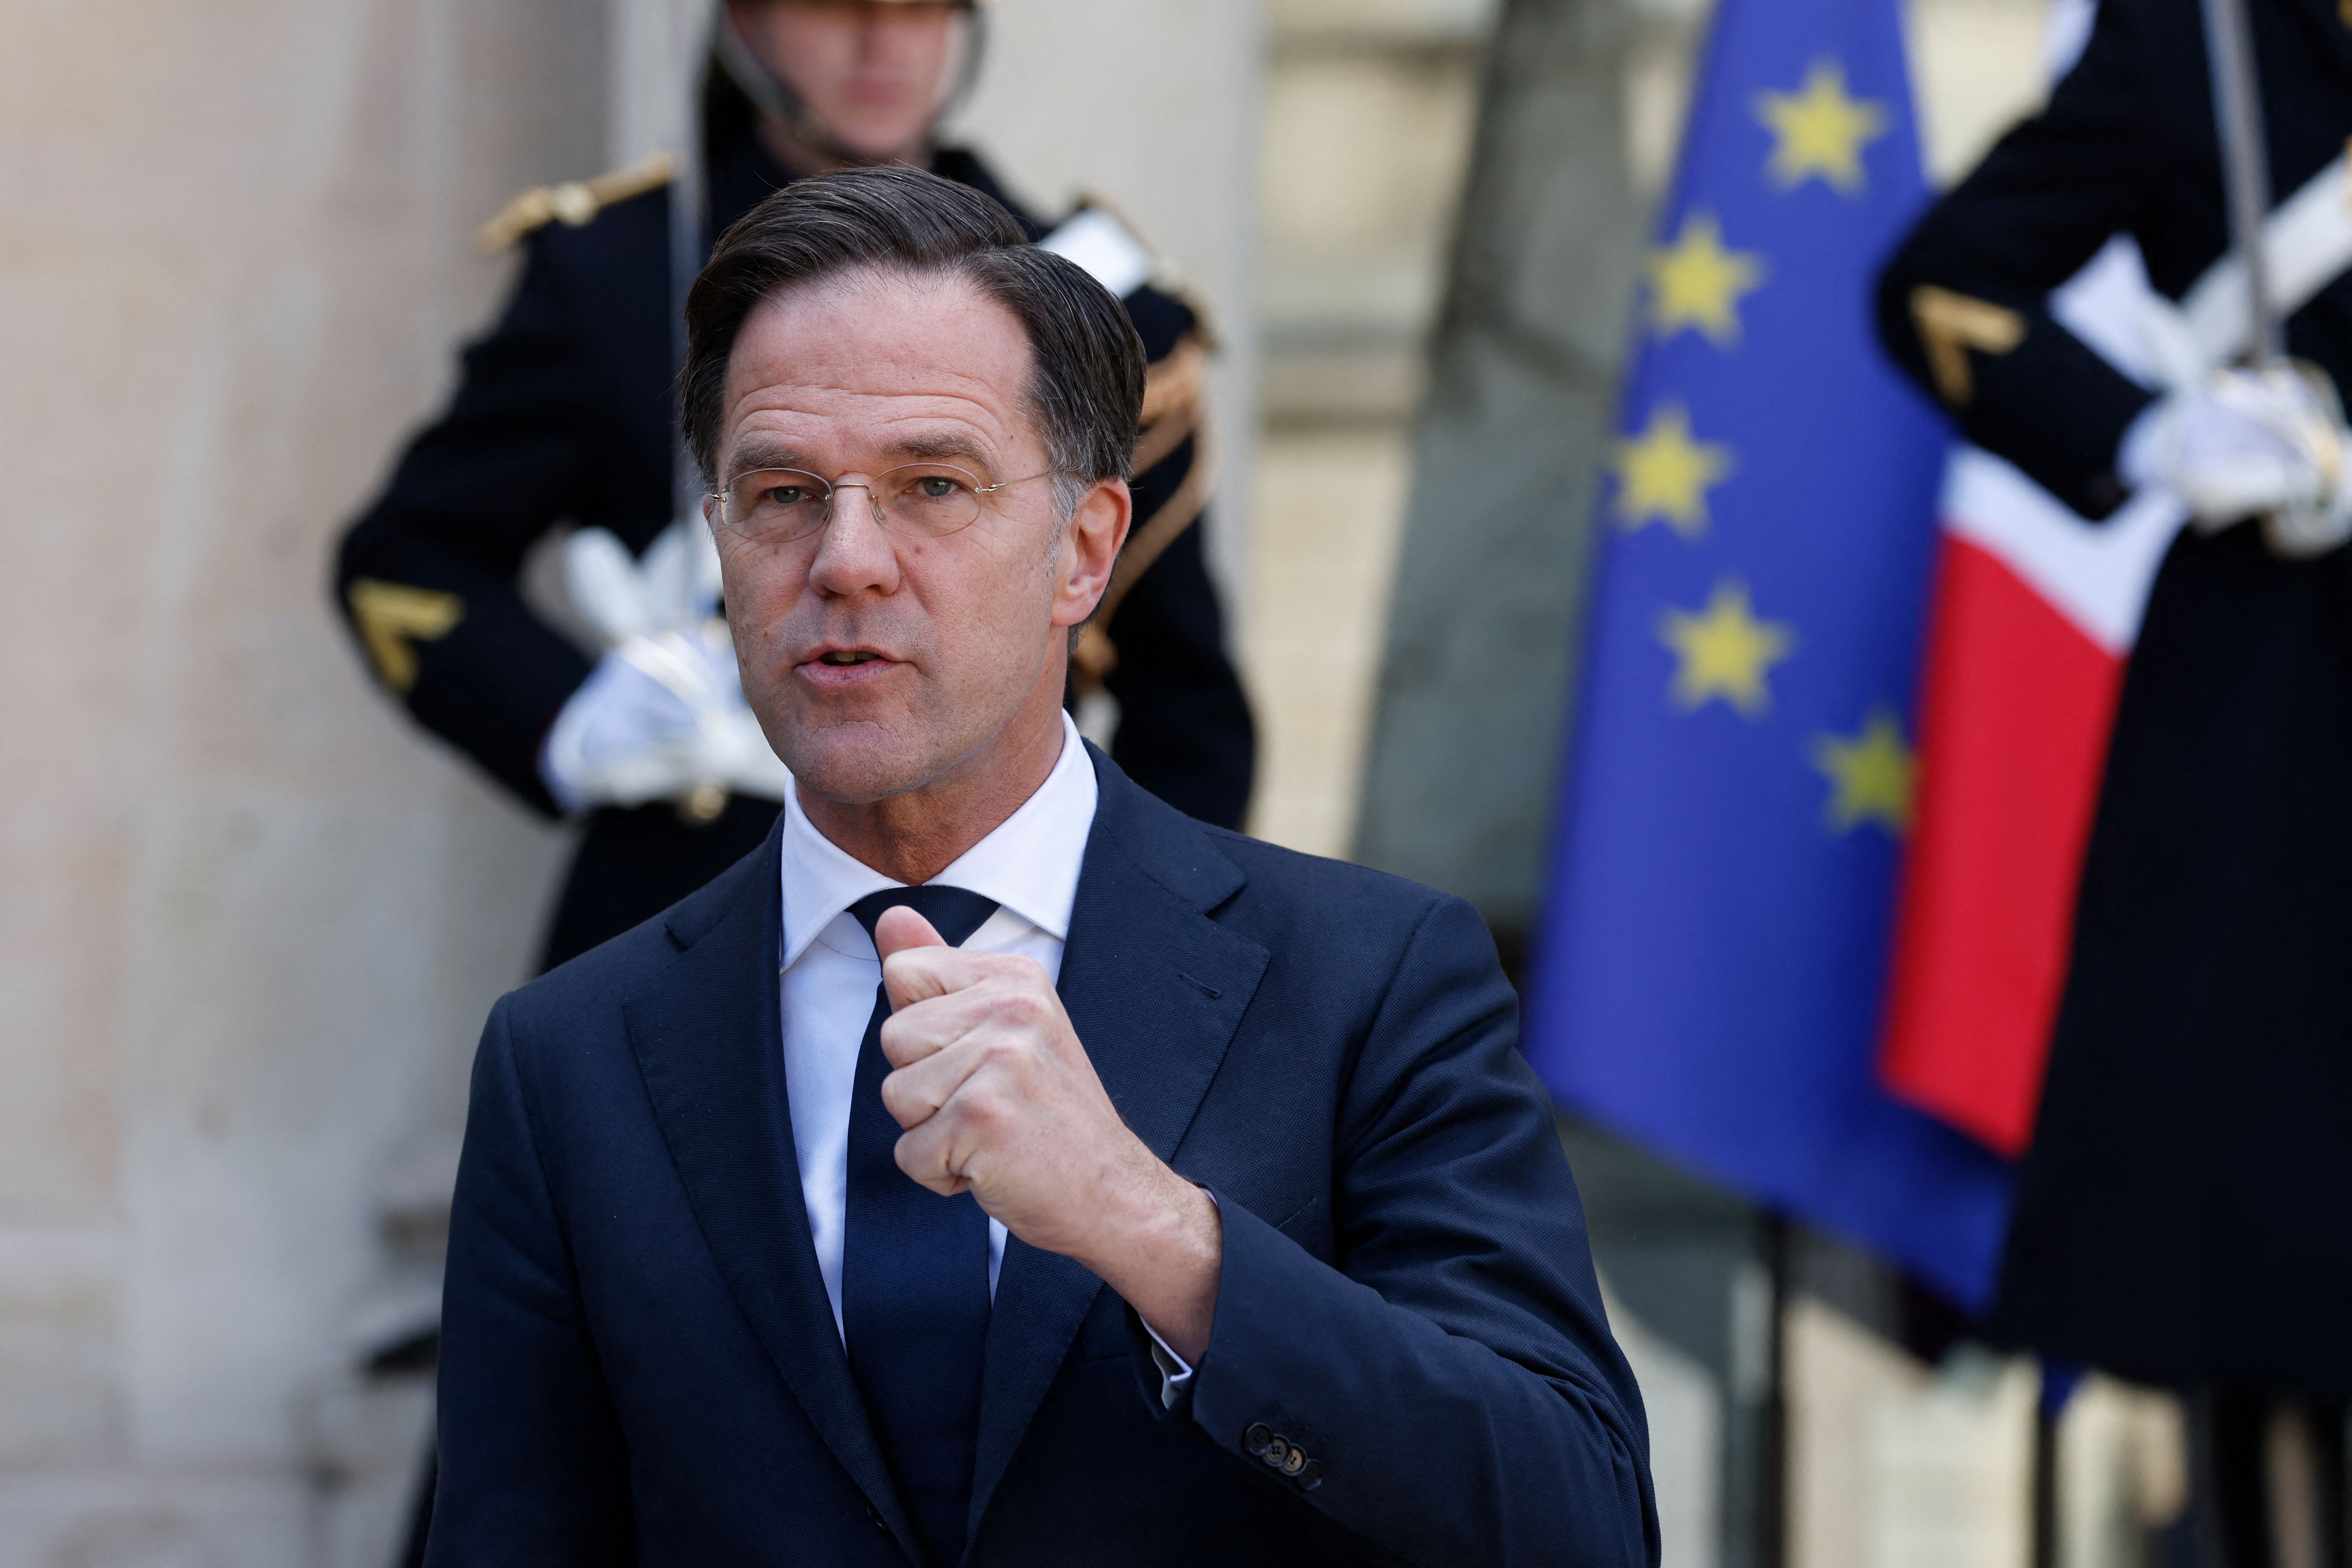 Netherlands' Prime Minister Mark Rutte addresses the media at The Elysee Presidential Palace in Paris, France, on March 9.